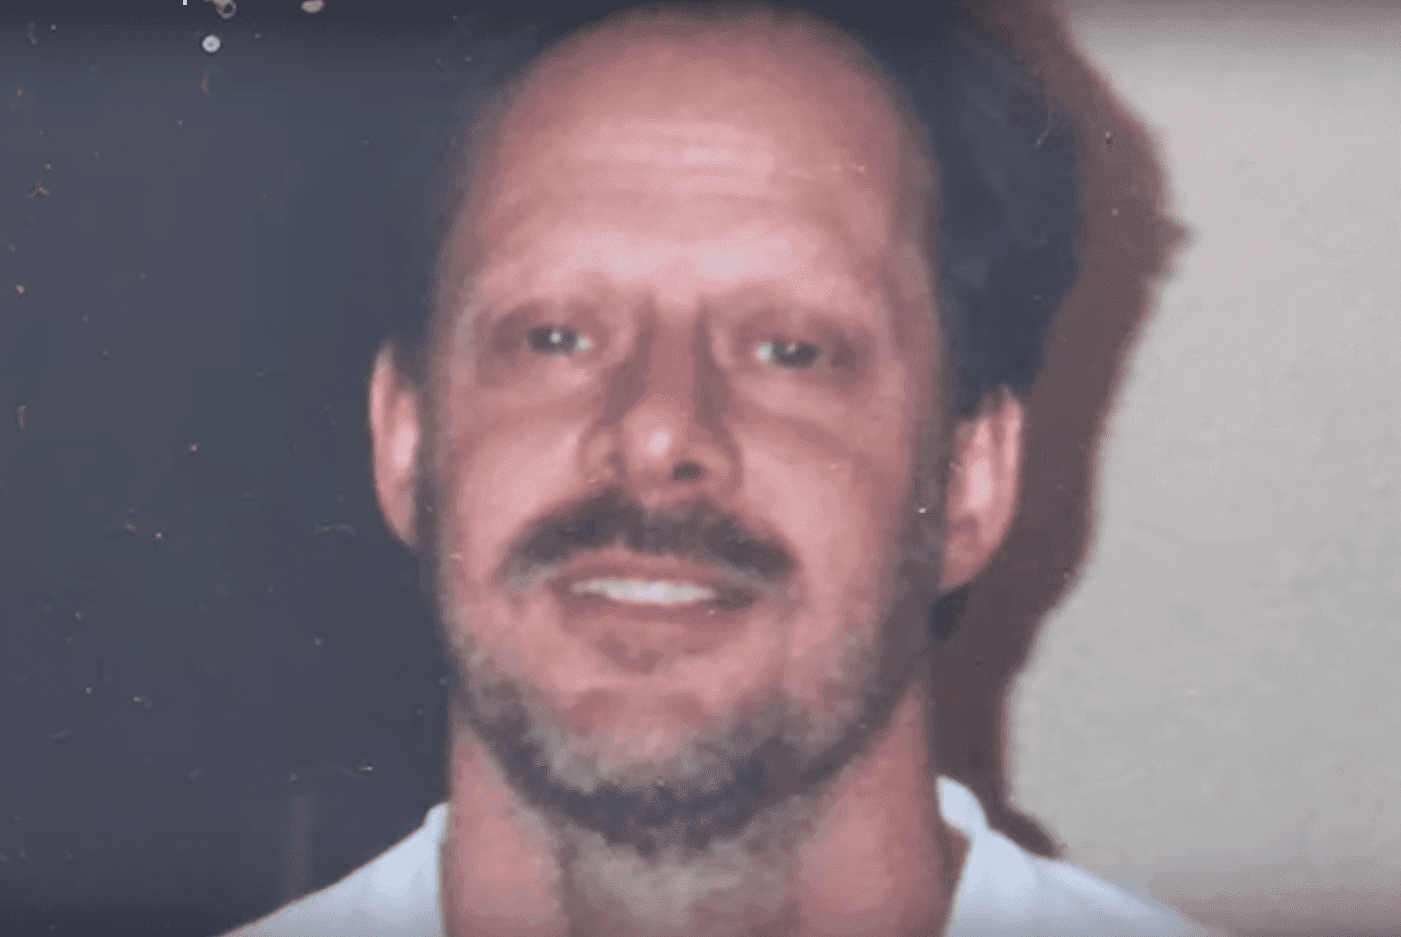 Stephen Paddock carried out the deadliest mass shooting in U.S. history. | Photo: YouTube/Fox News